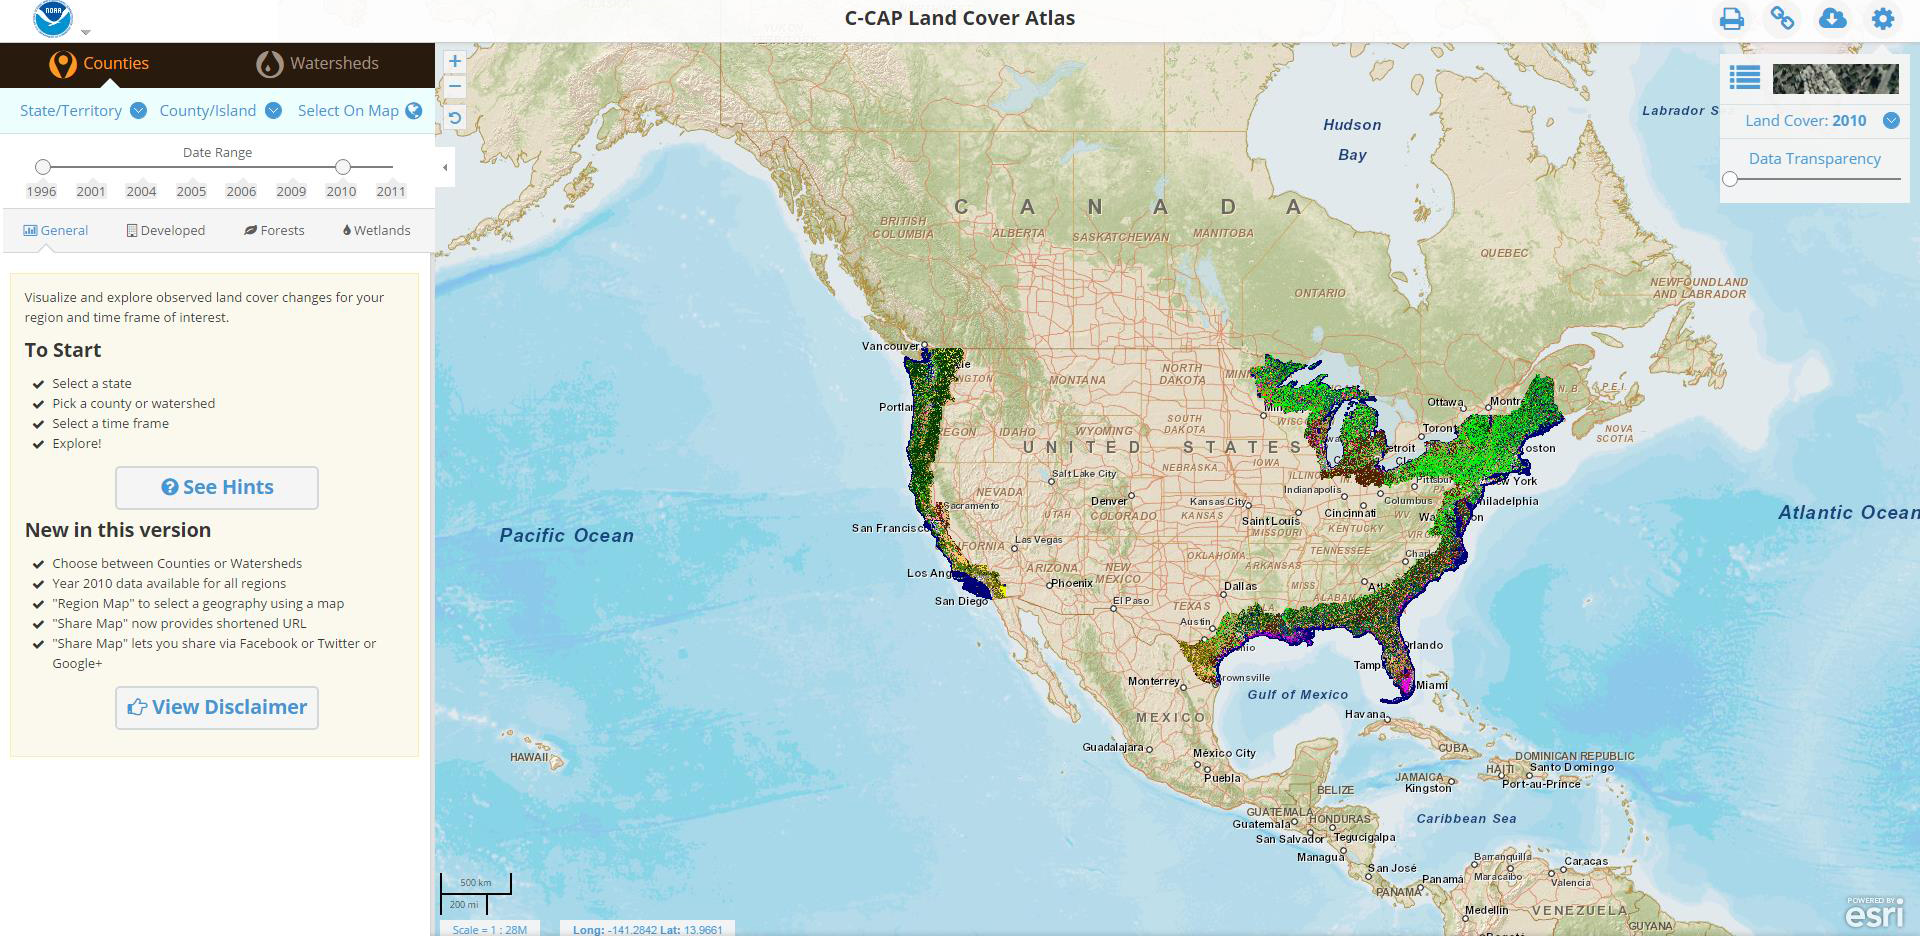 A screenshot of the tool, C-CAP Land Cover Atlas, being used.